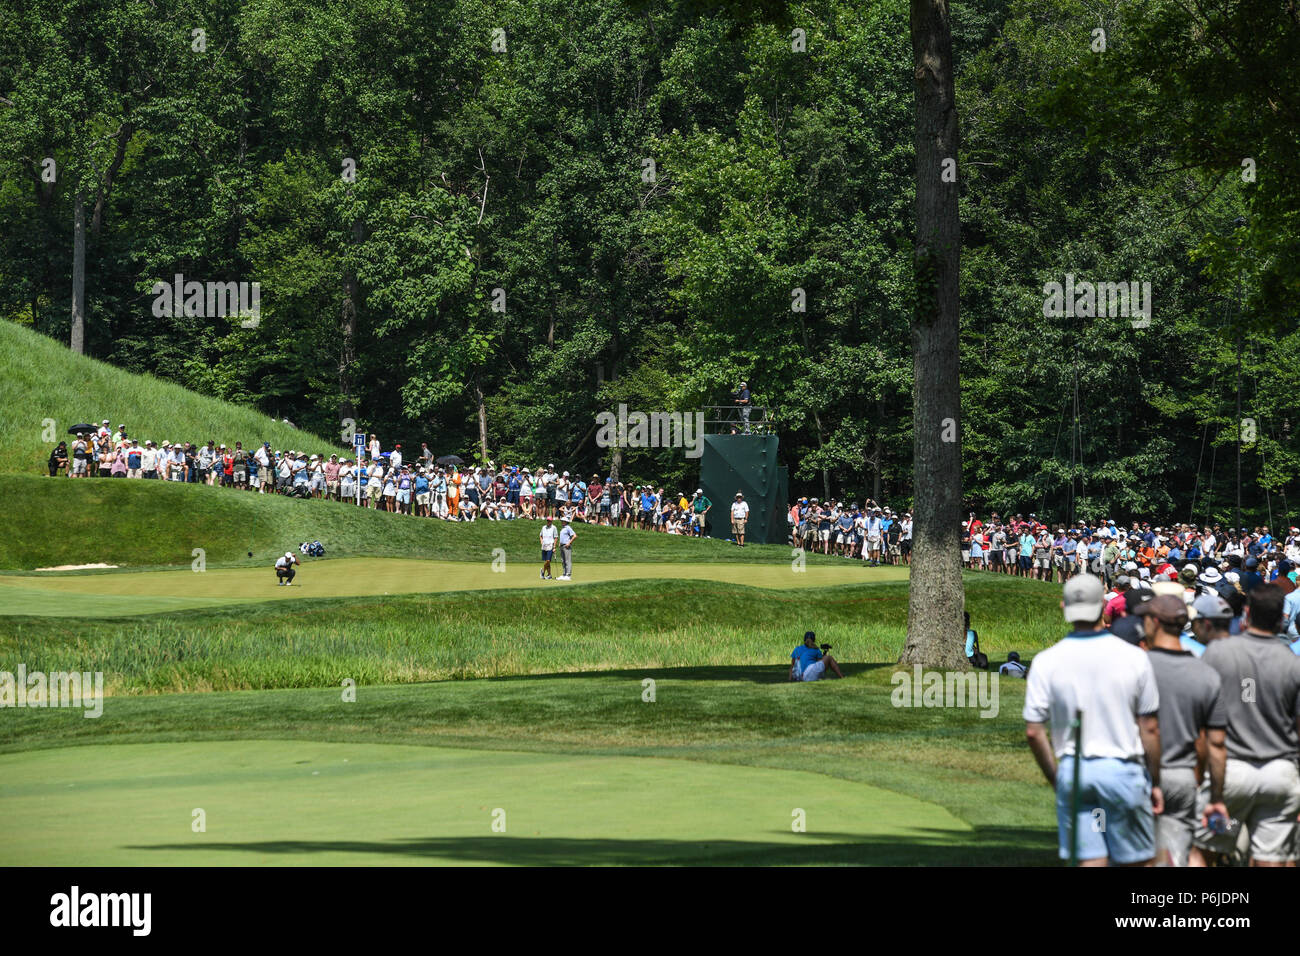 JUNE 30, 2018 - Huge galleries surround Tiger Woods (USA) on the eleventh hole during the third round at the 2018 Quicken Loans National at the Tournament Players Club in Potomac MD. Stock Photo